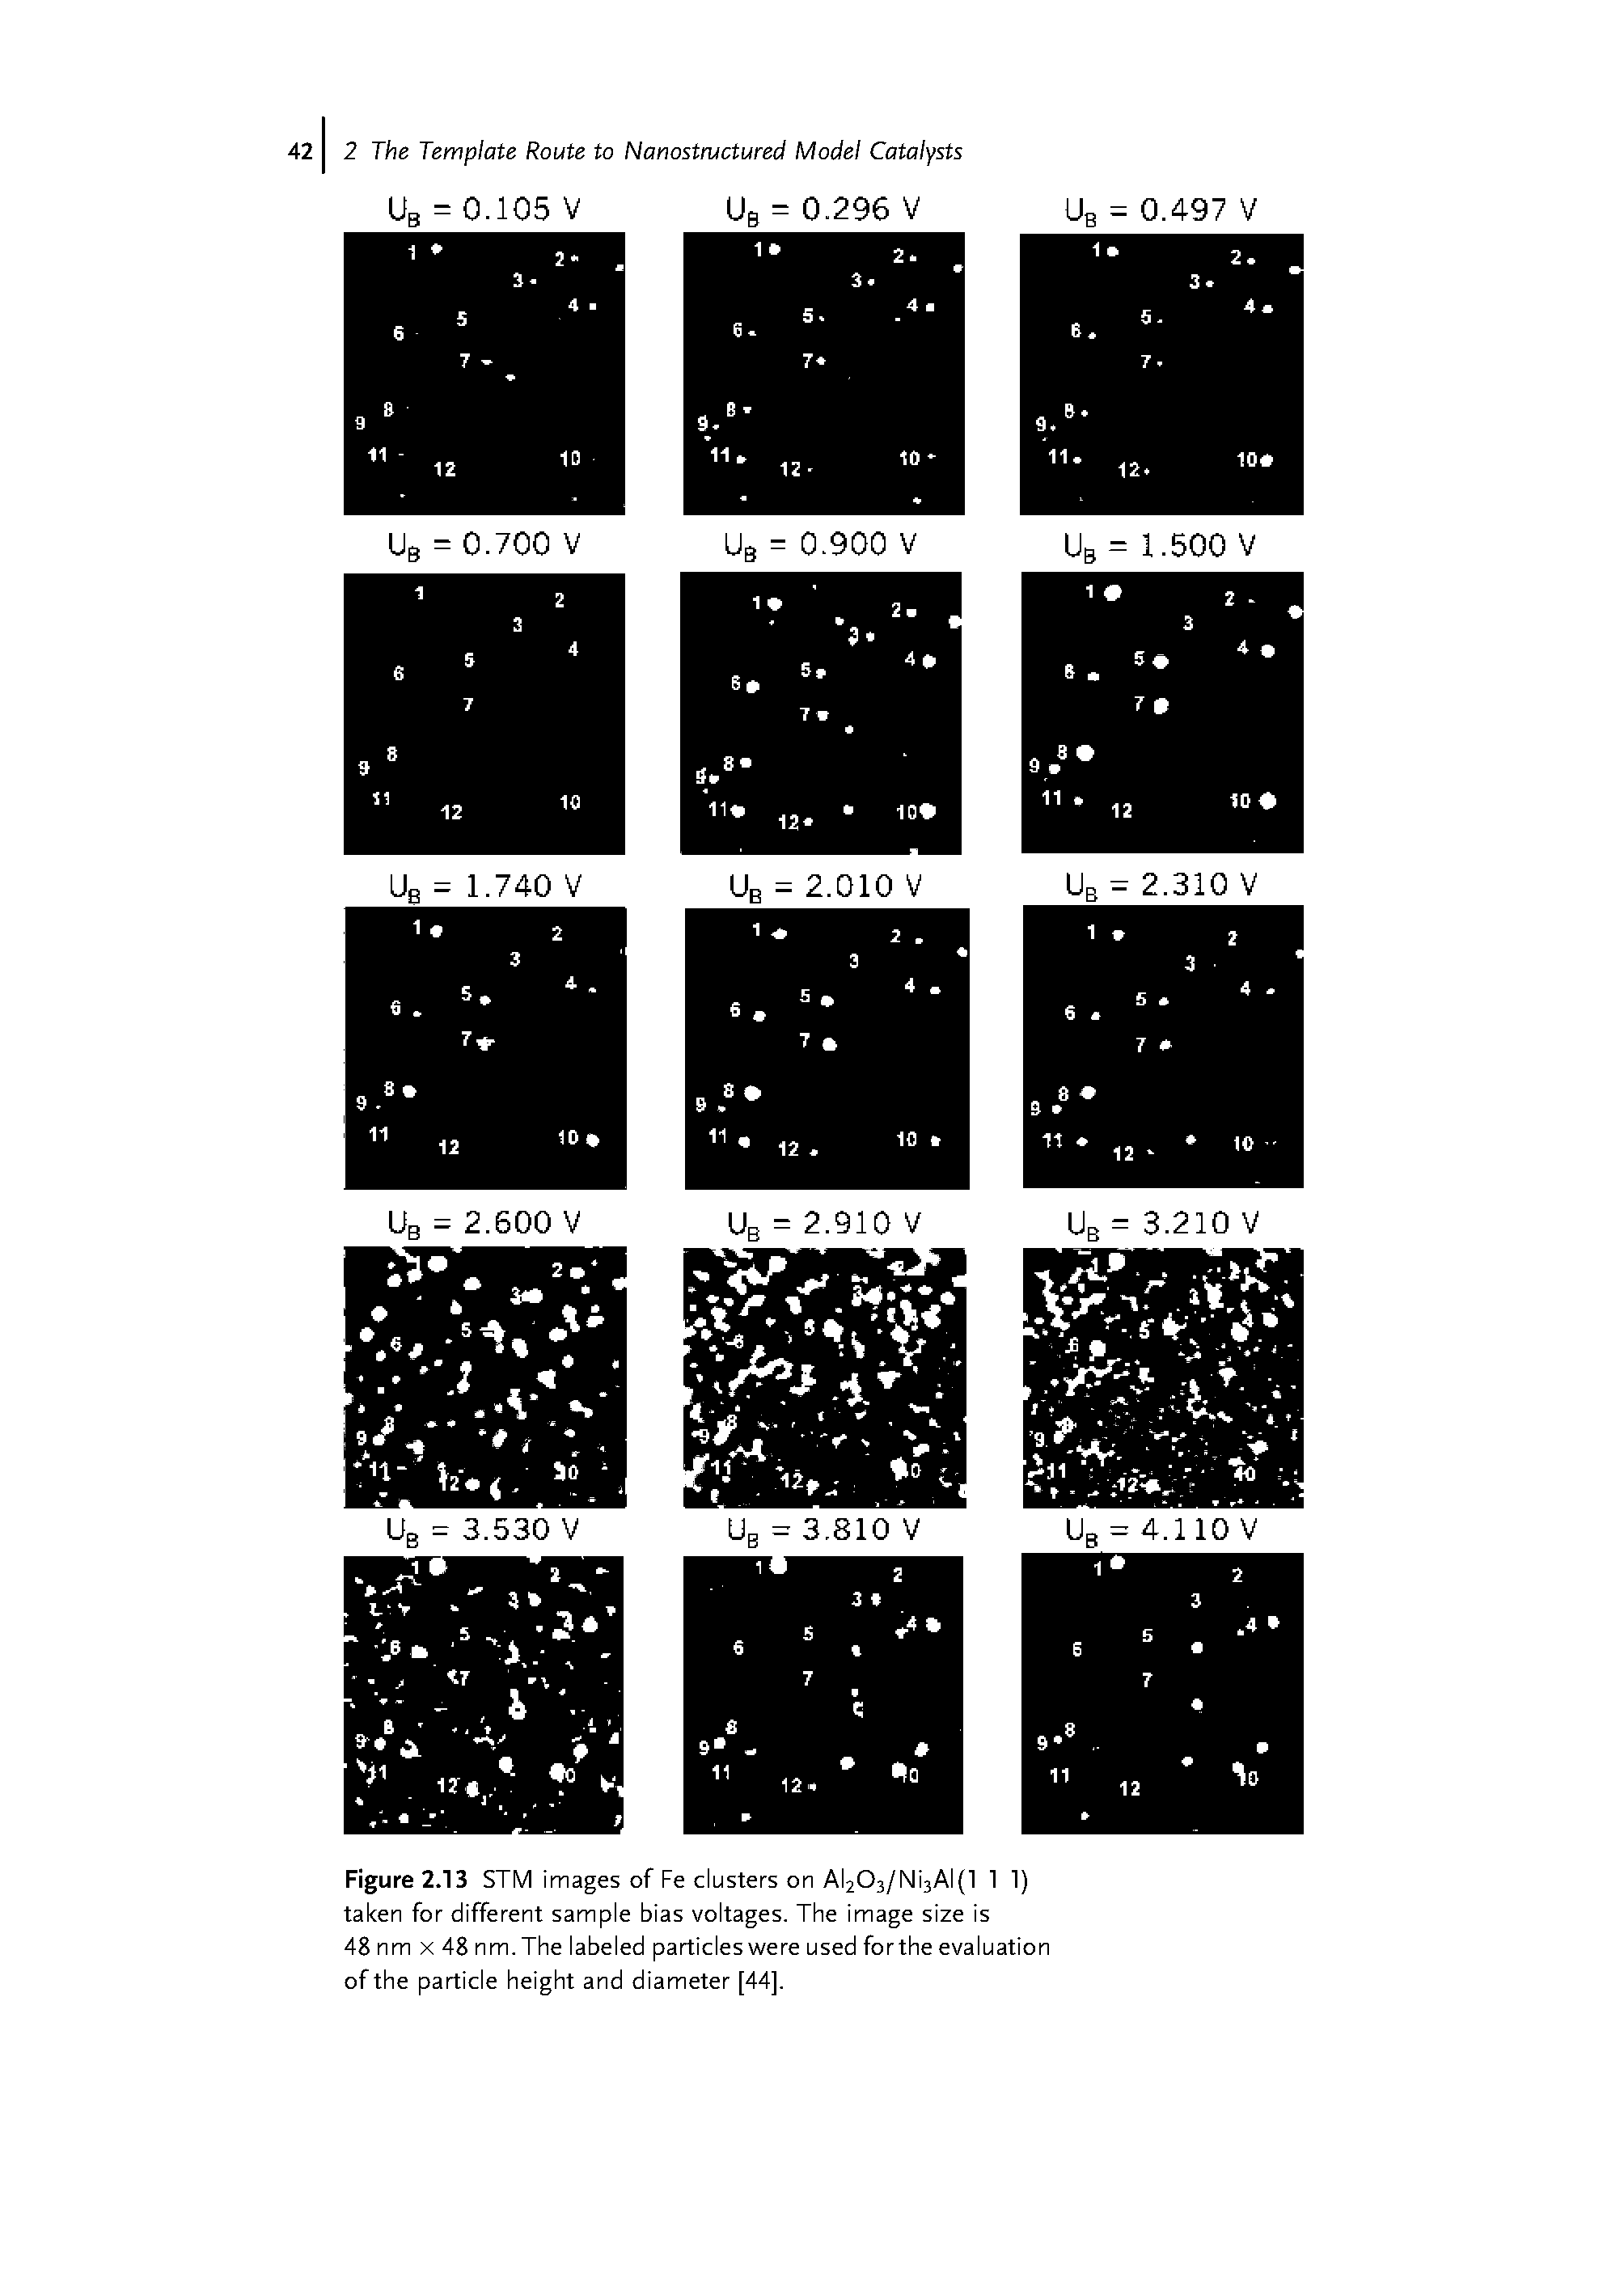 Figure 2.13 STM images of Fe clusters on Al203/Ni3AI(1 1 1) taken for different sample bias voltages. The image size is 48 nm x 48 nm. The labeled particles were used for the evaluation of the particle height and diameter [44].